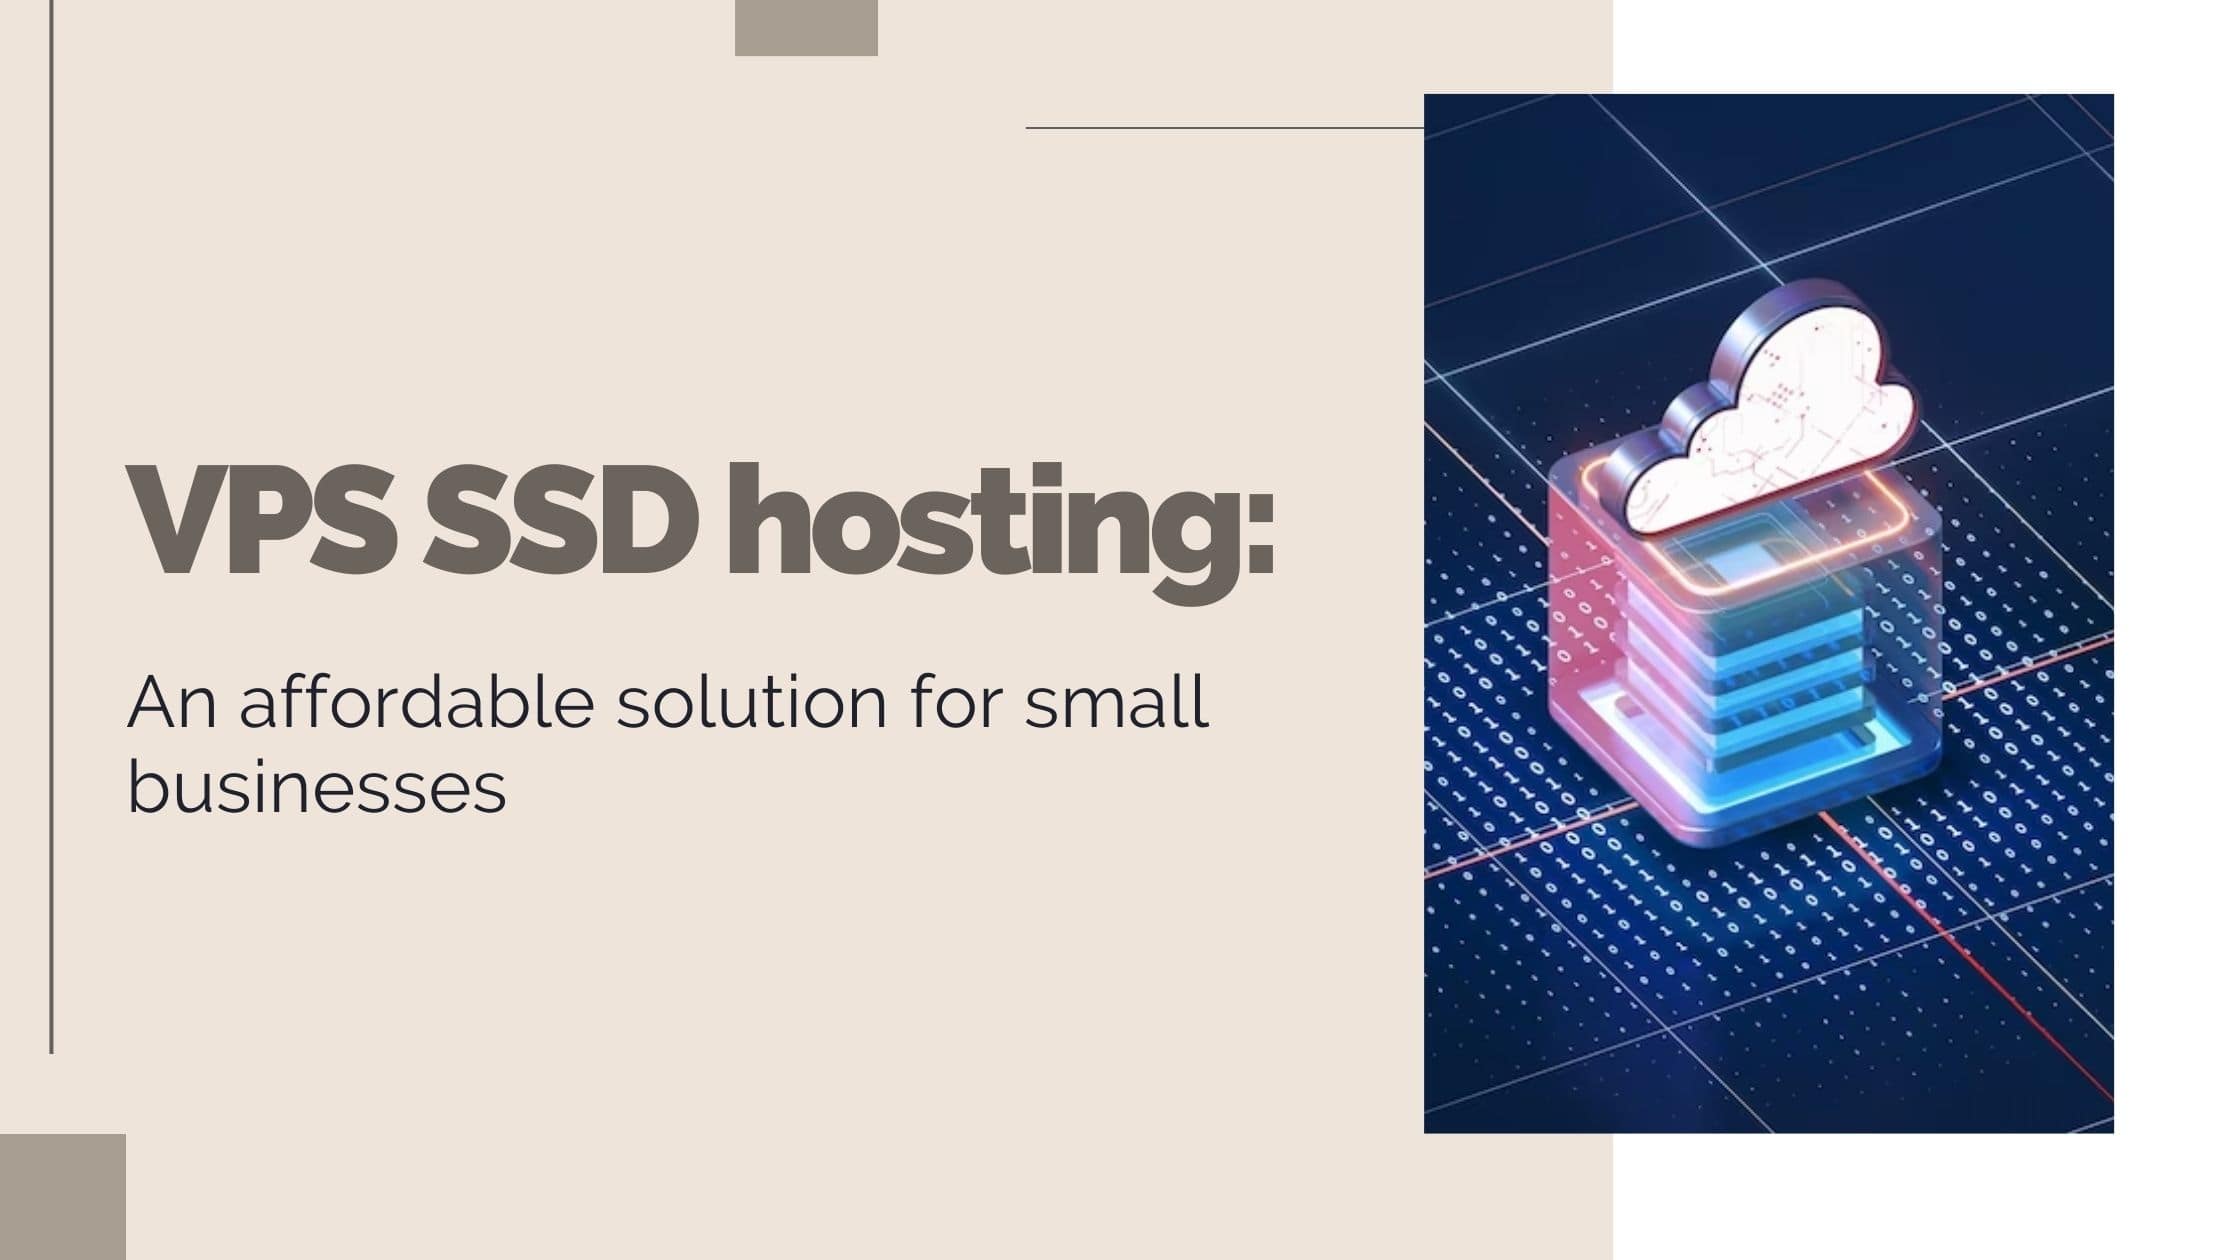 VPS SSD hosting An affordable solution for small businesses